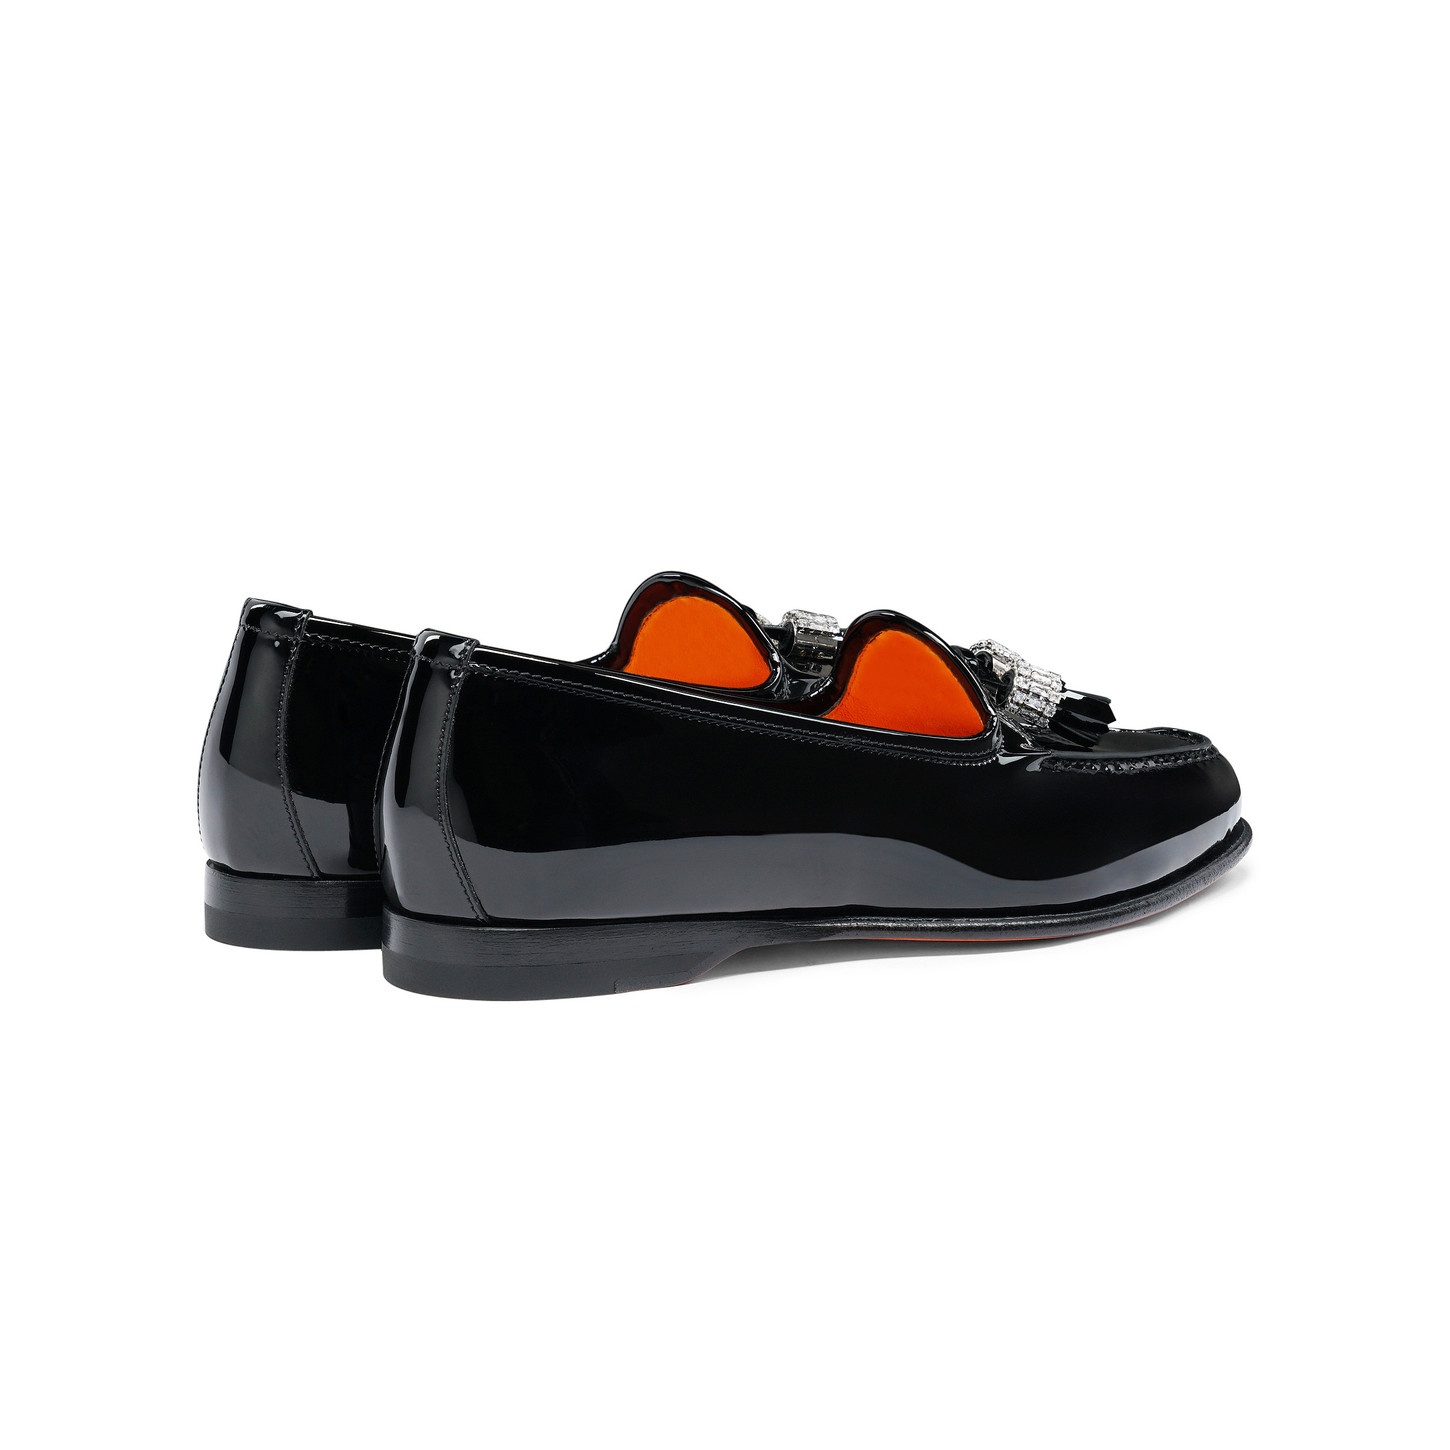 Women's black patent leather Andrea loafer - 4